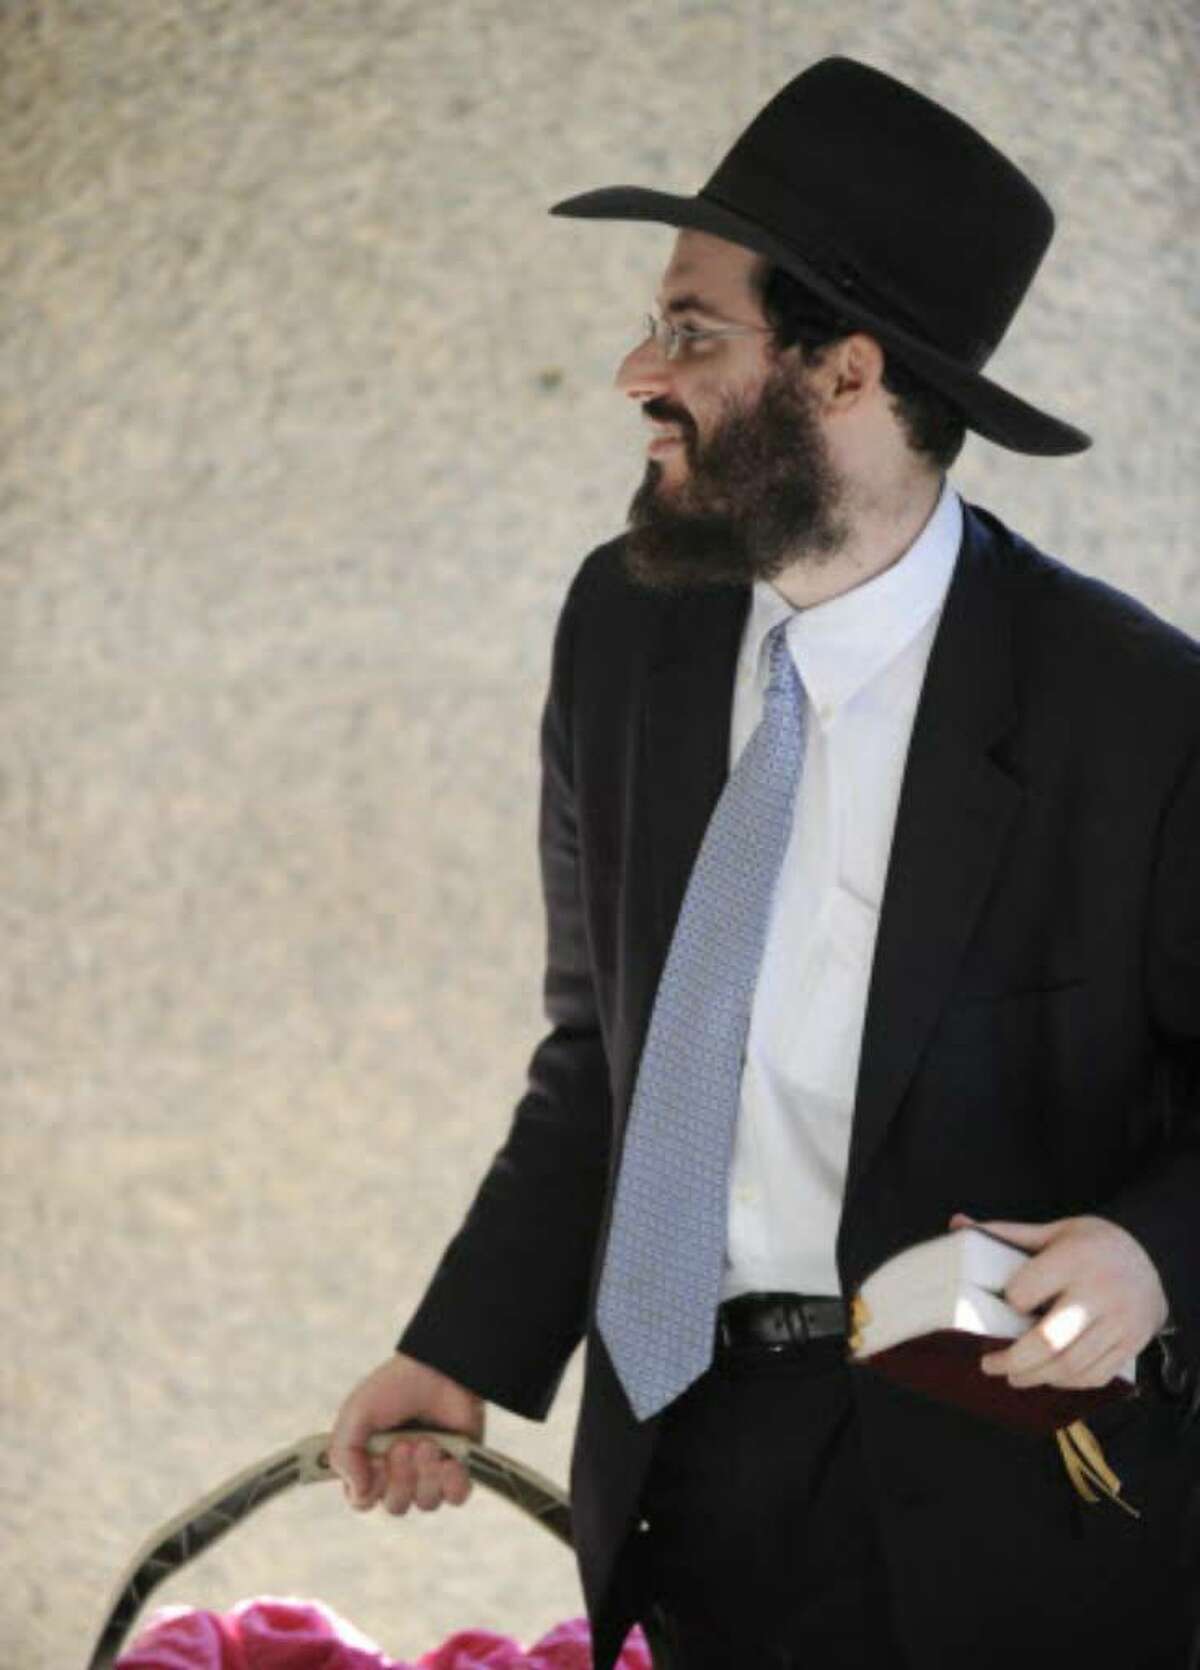 Rabbi Yaakov Weiss at Albany City Court on Oct. 7, 2008 as he awaited his appearance to answer charges on alleged sex abuse charges stemming from alleged incidents involving a 13-year-old boy. (File photo)